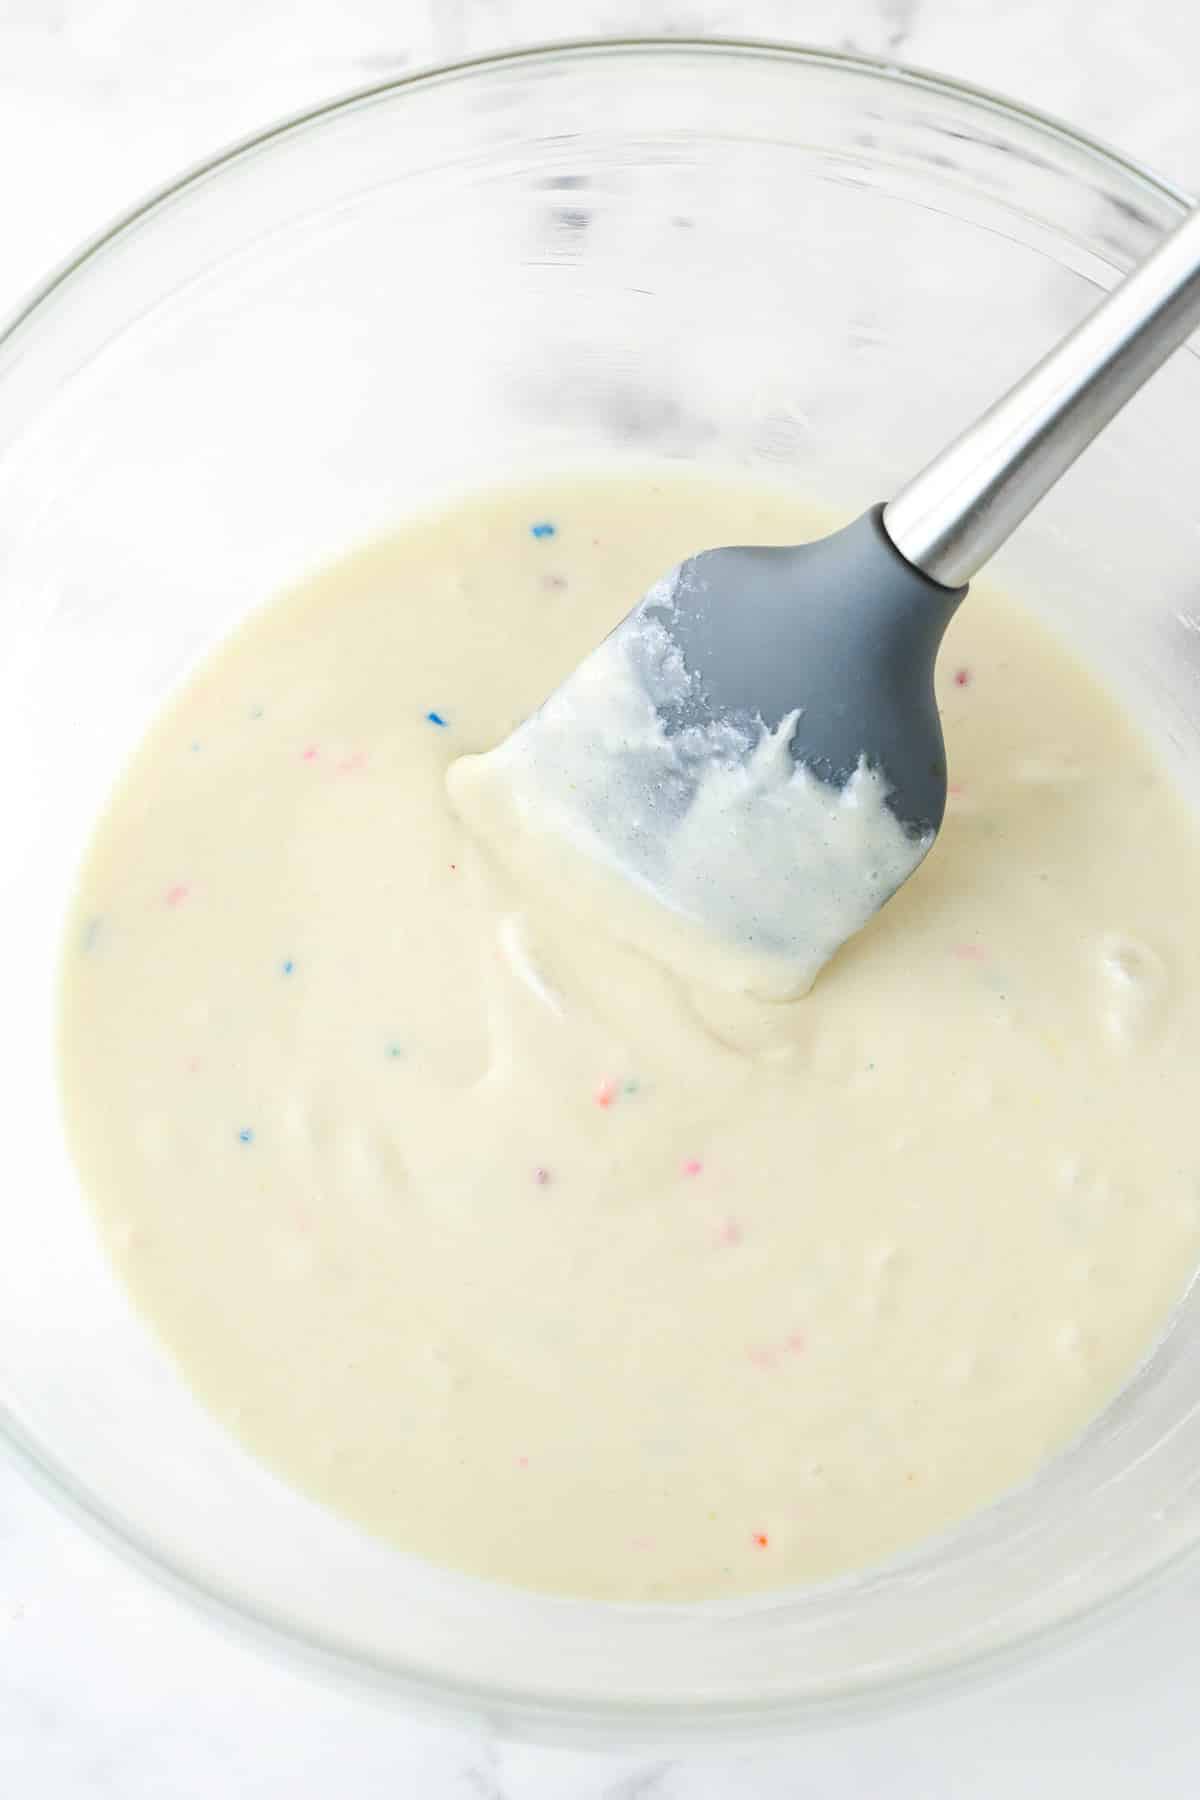 Mixing together sweetened condensed milk, milk, cooled cake mix, and vanilla extract.